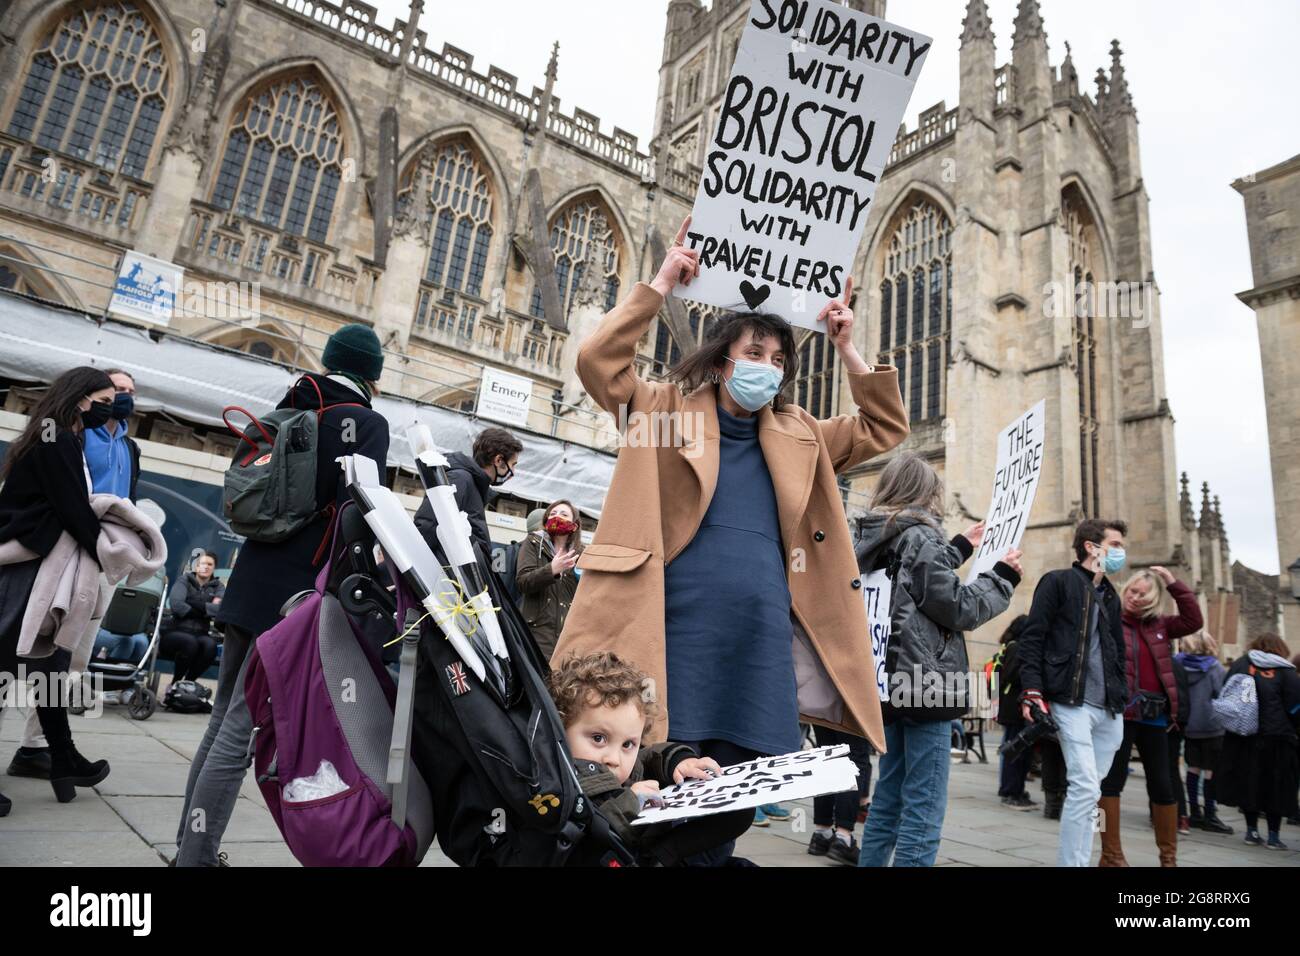 Bath, UK. 27th March 2021. Approximately 200 mostly young protesters took to the streets of historic Bath in North Somerset to demonstrate against the police & crime bill. The group of demonstrators initially gathered at Bath Abbey before marching through the streets of the city centre shouting “kill the bill” and “who's streets, our streets”. A small number of police accompanied the march which went ahead peacefully and without incident. Stock Photo